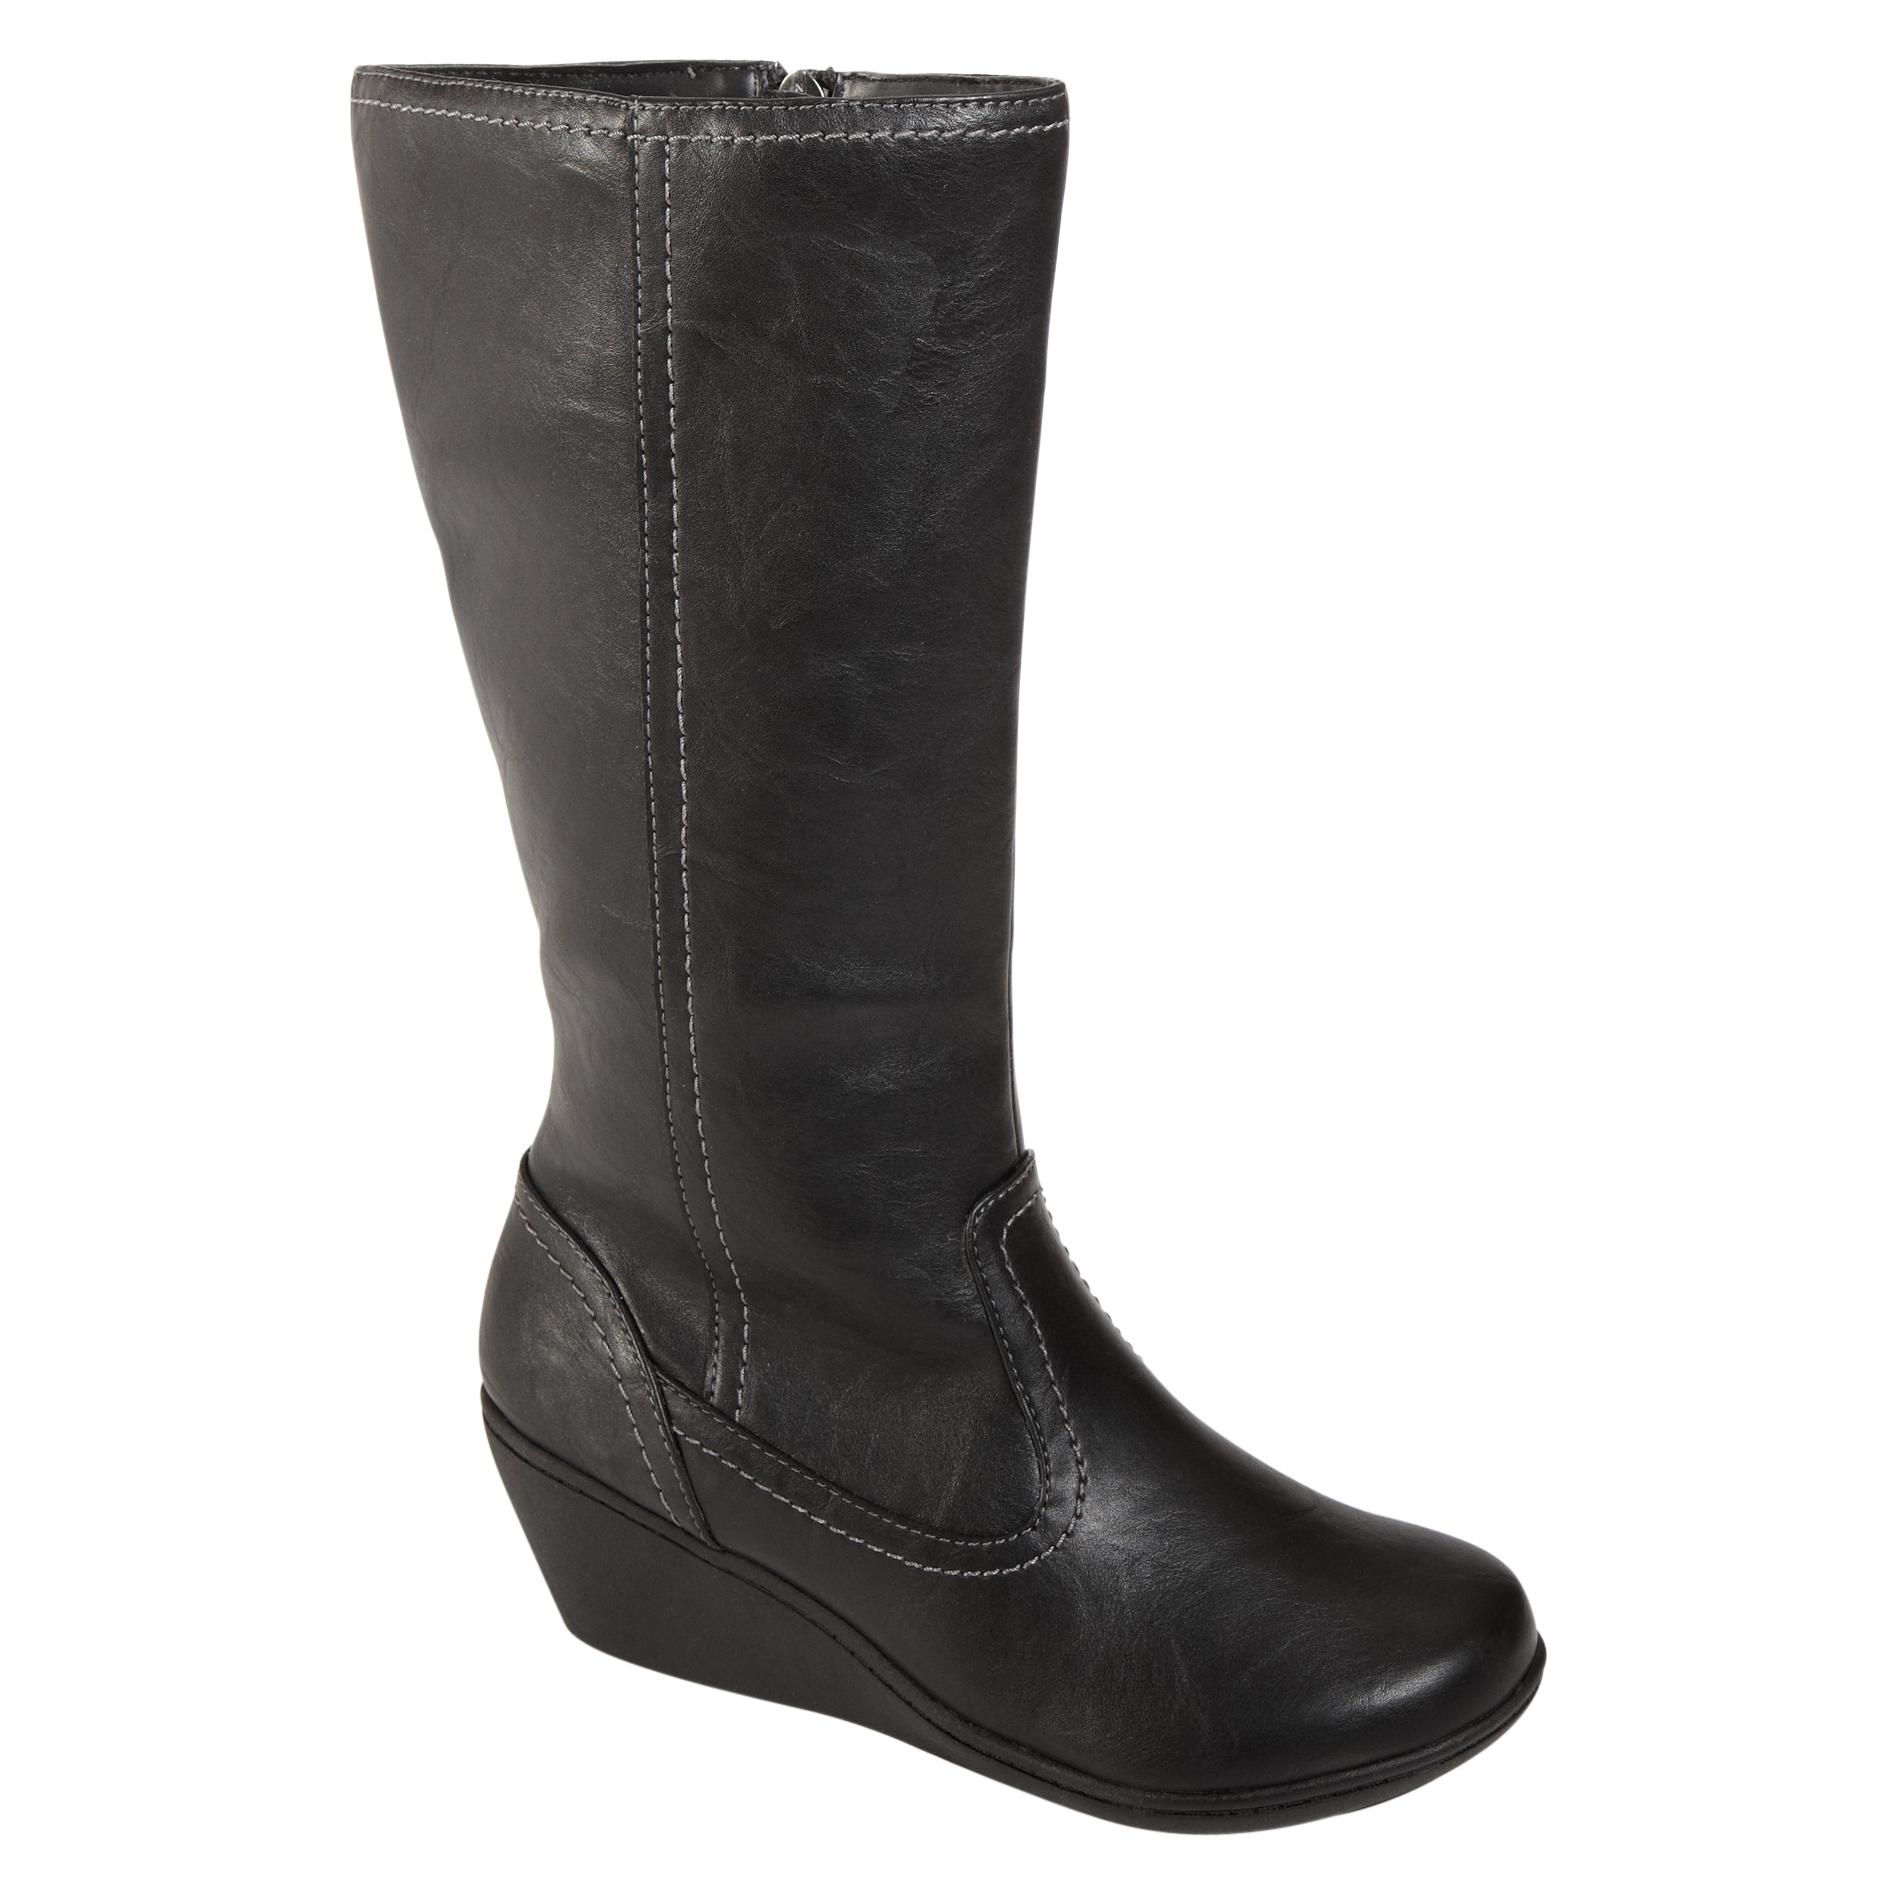 Only at Sears! Women’s I Love Comfort Wedge Fashion Boot Patty - Black